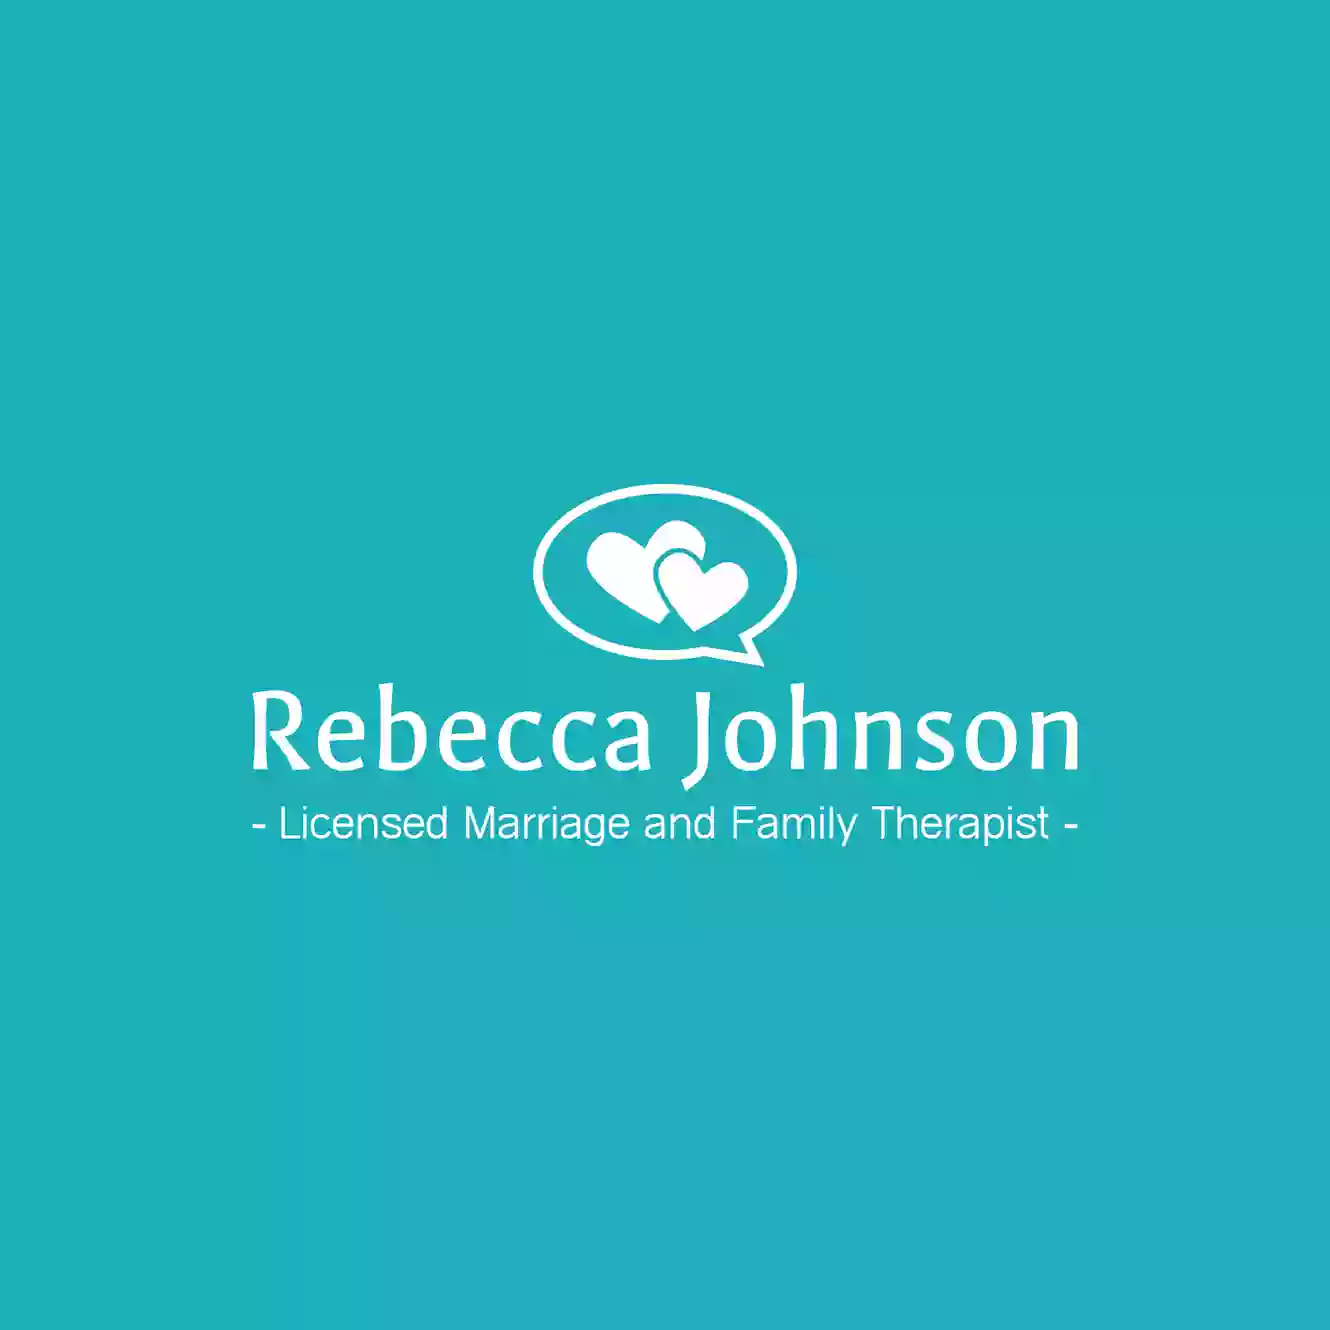 Rebecca Johnson, Licensed Marriage and Family Therapist